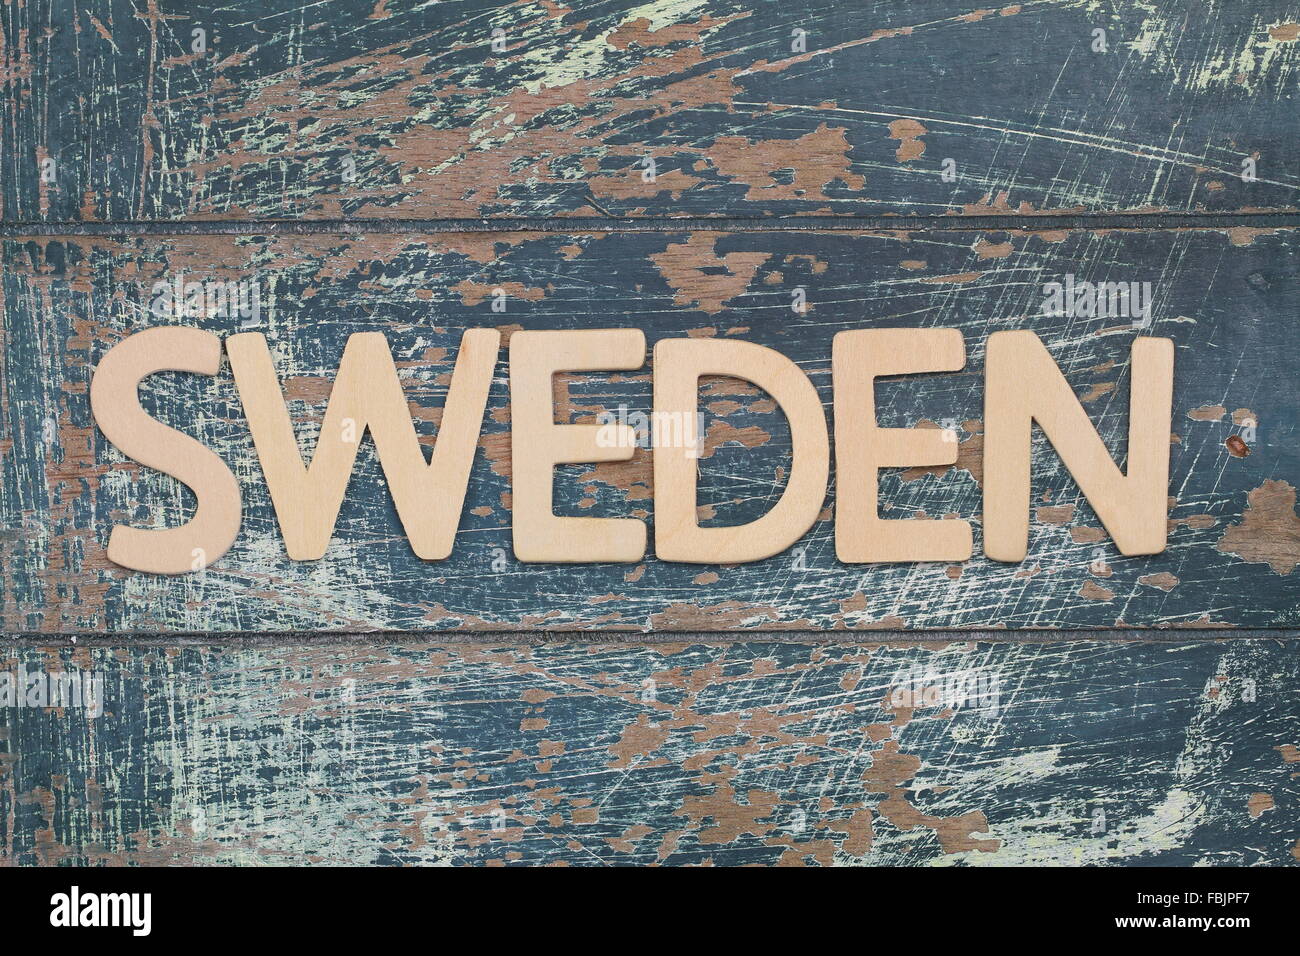 Sweden written with wooden letters on rustic surface Stock Photo